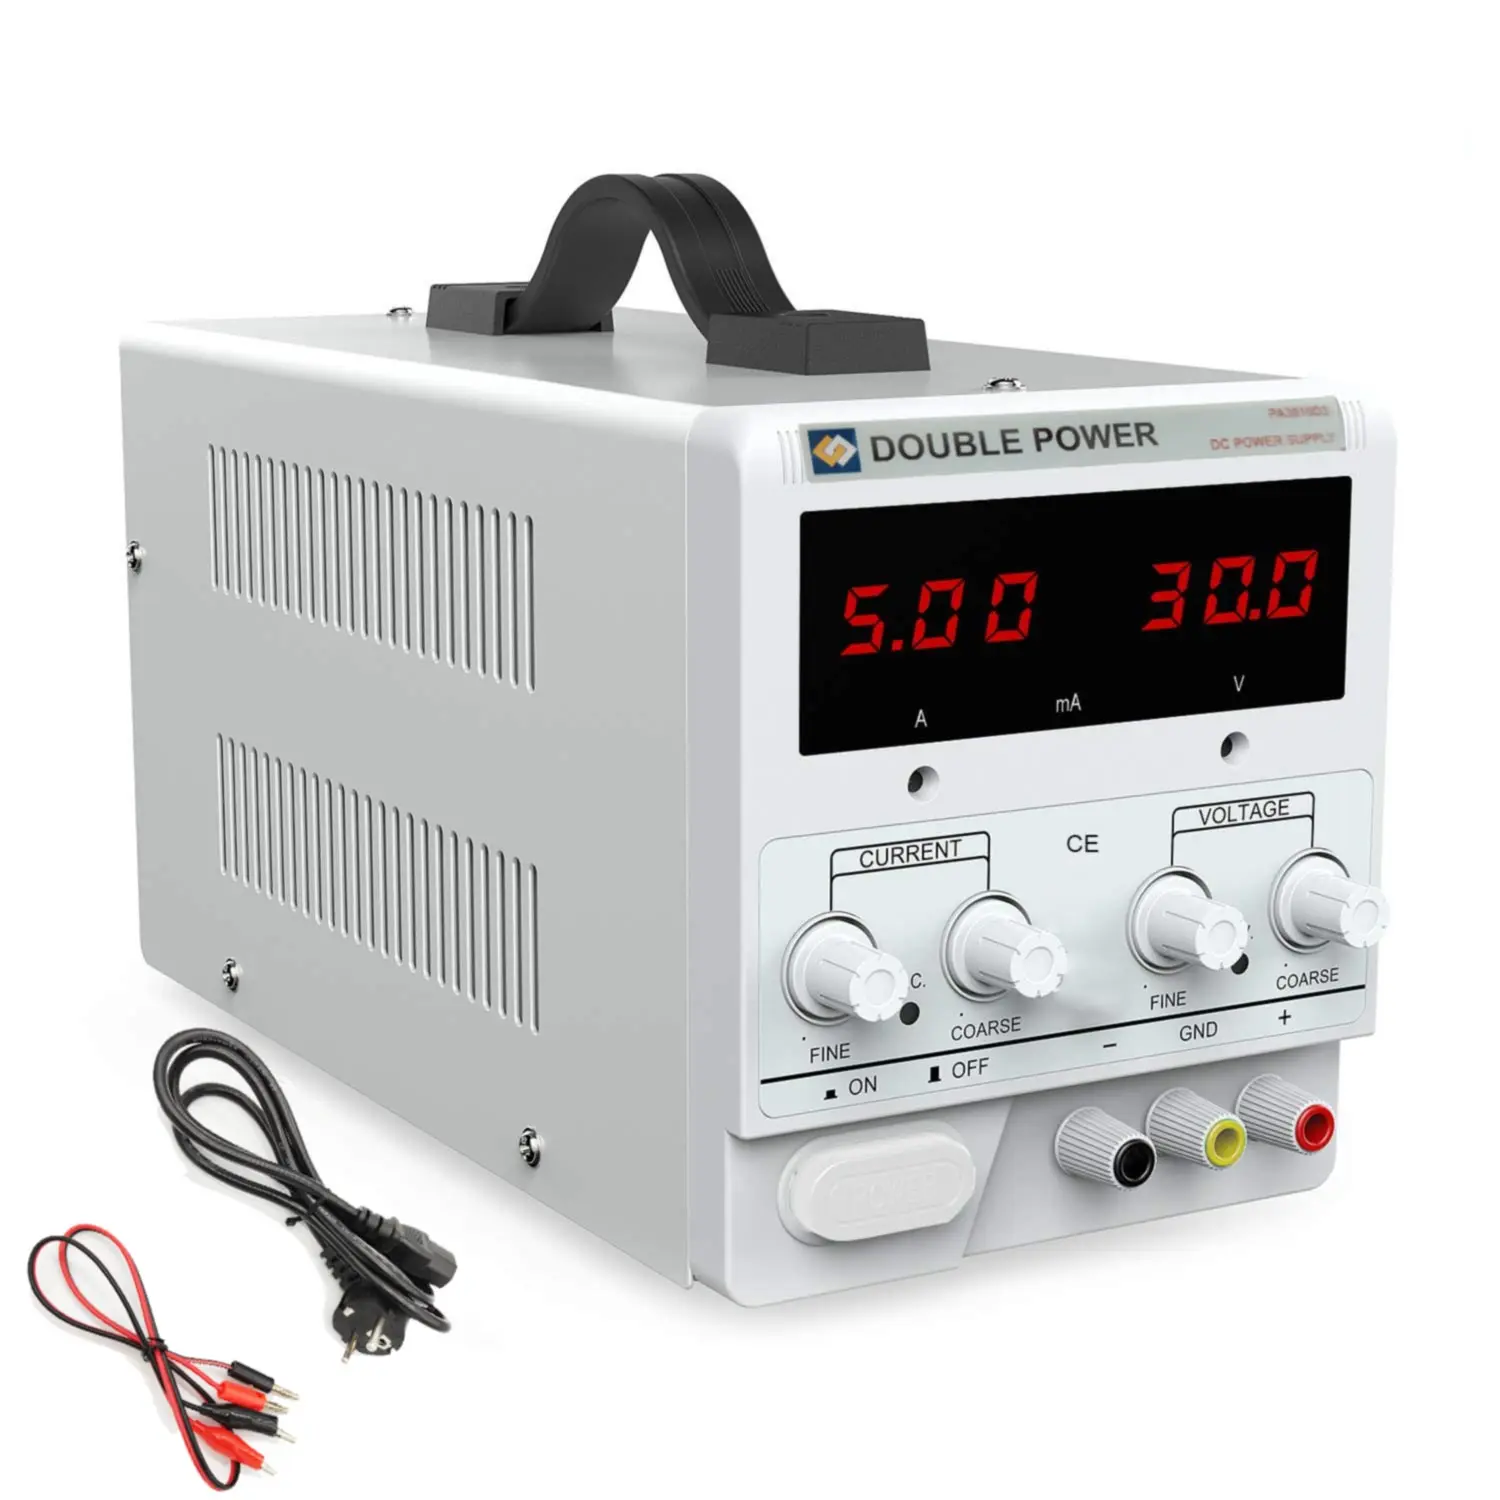 Digital DC Power Supply Variable Bench 30V 10A with Alligator Leads Power Cable 